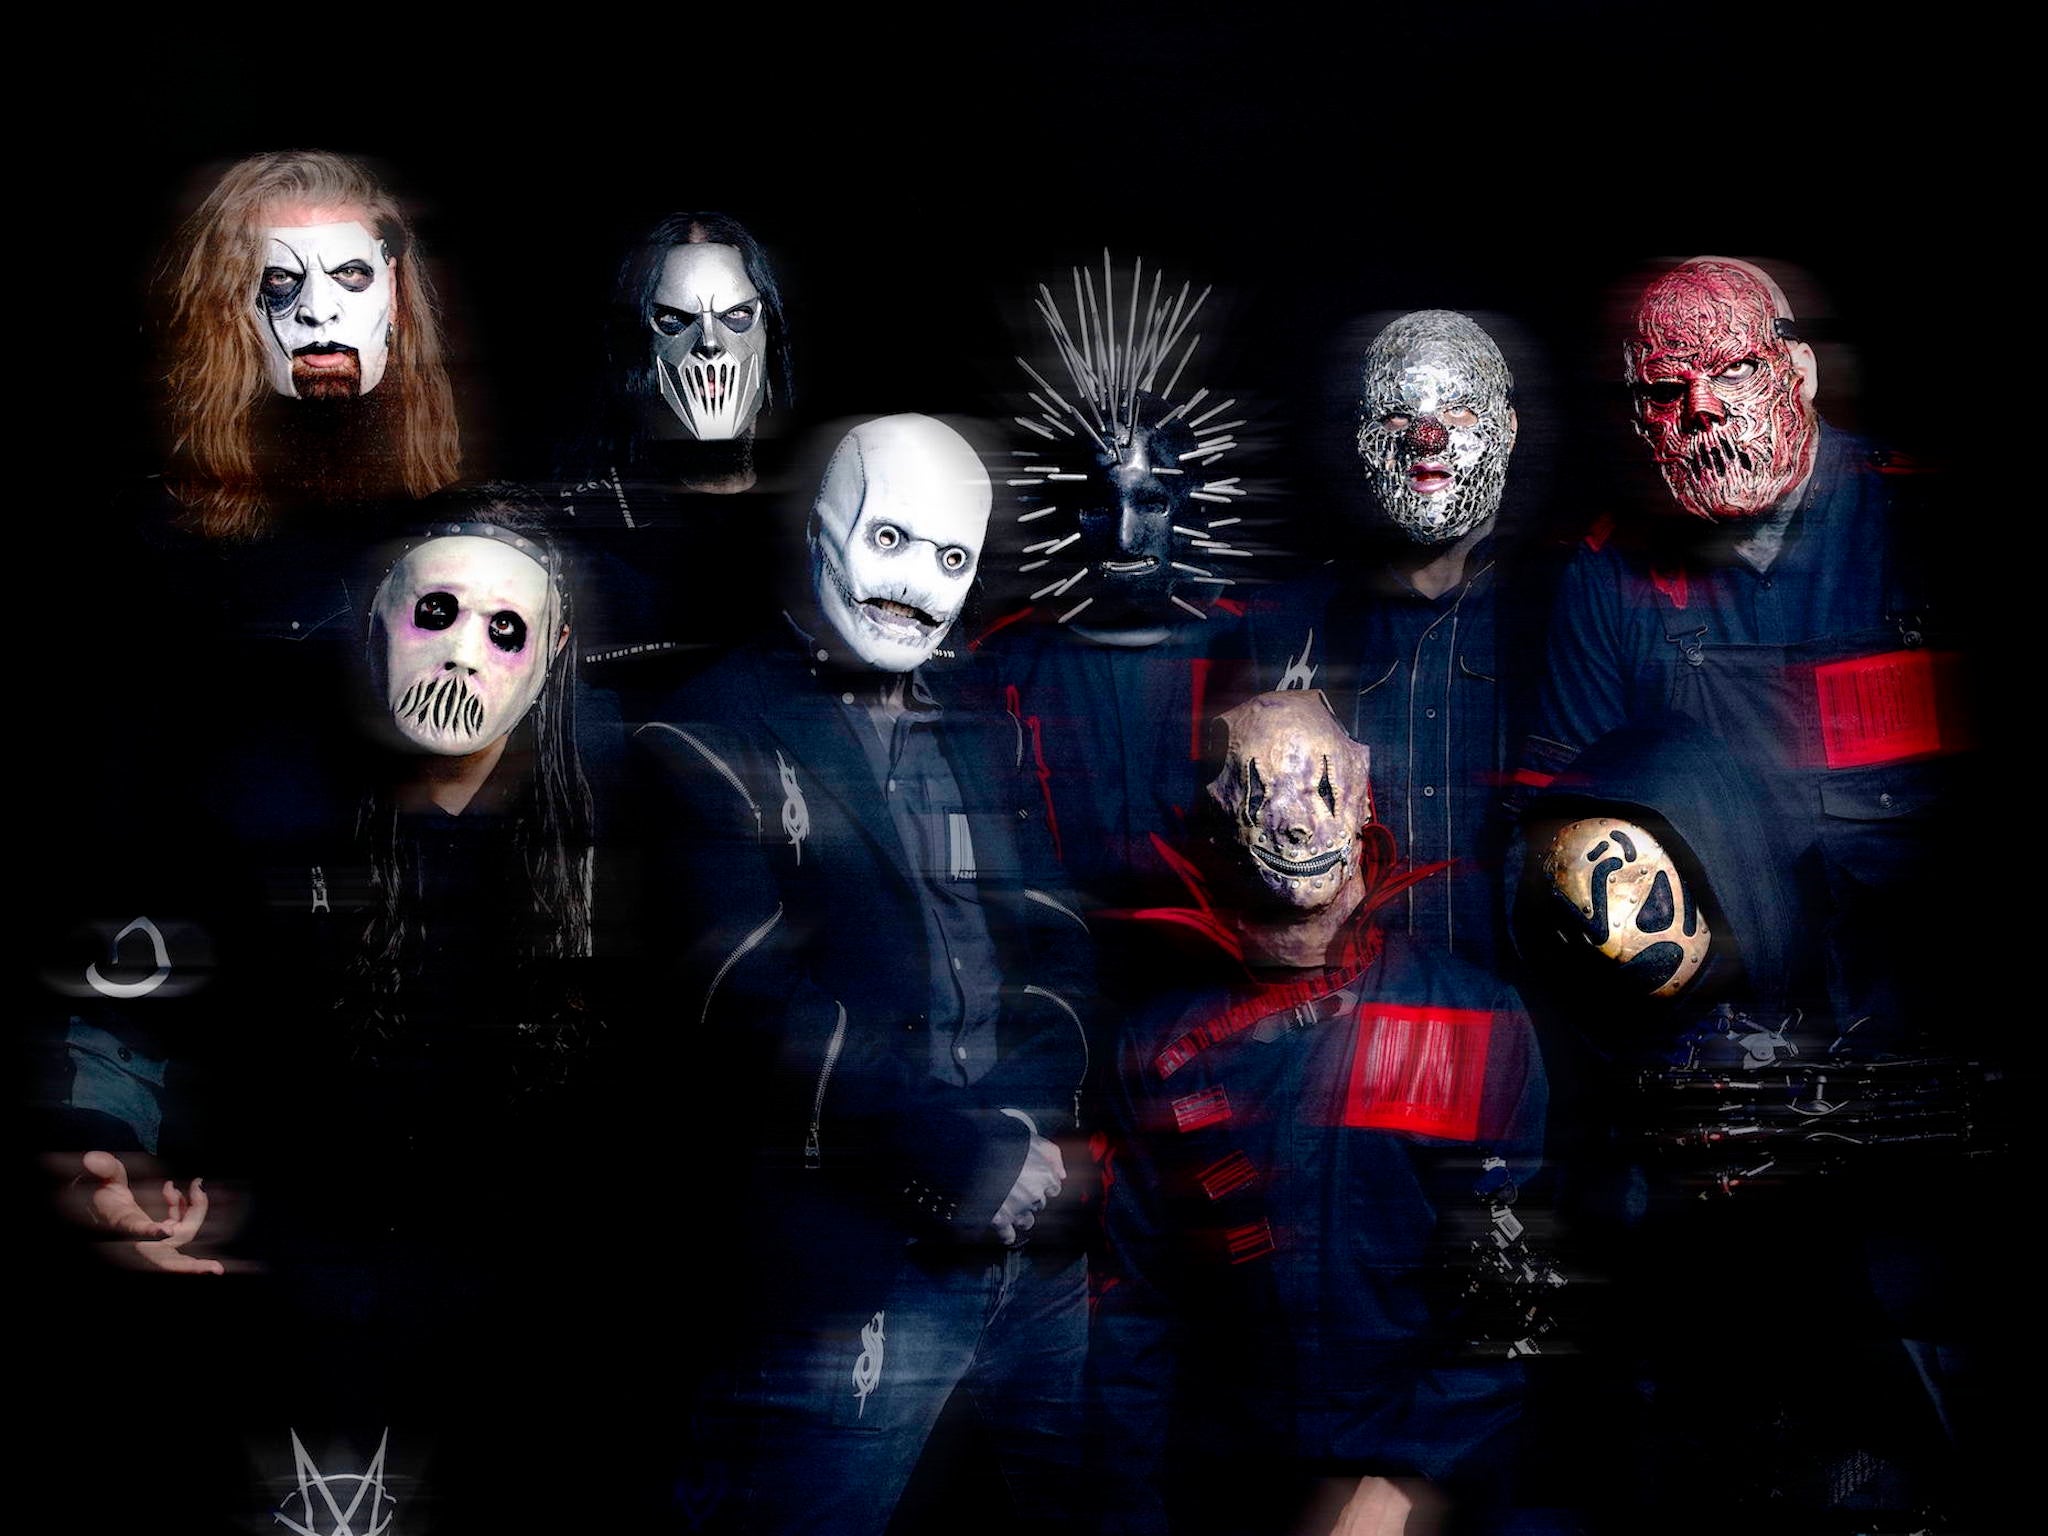 Slipknot's Shawn Crahan: 'I know what real evil is My past problems are minuscule compared the path my wife and are on' | Independent